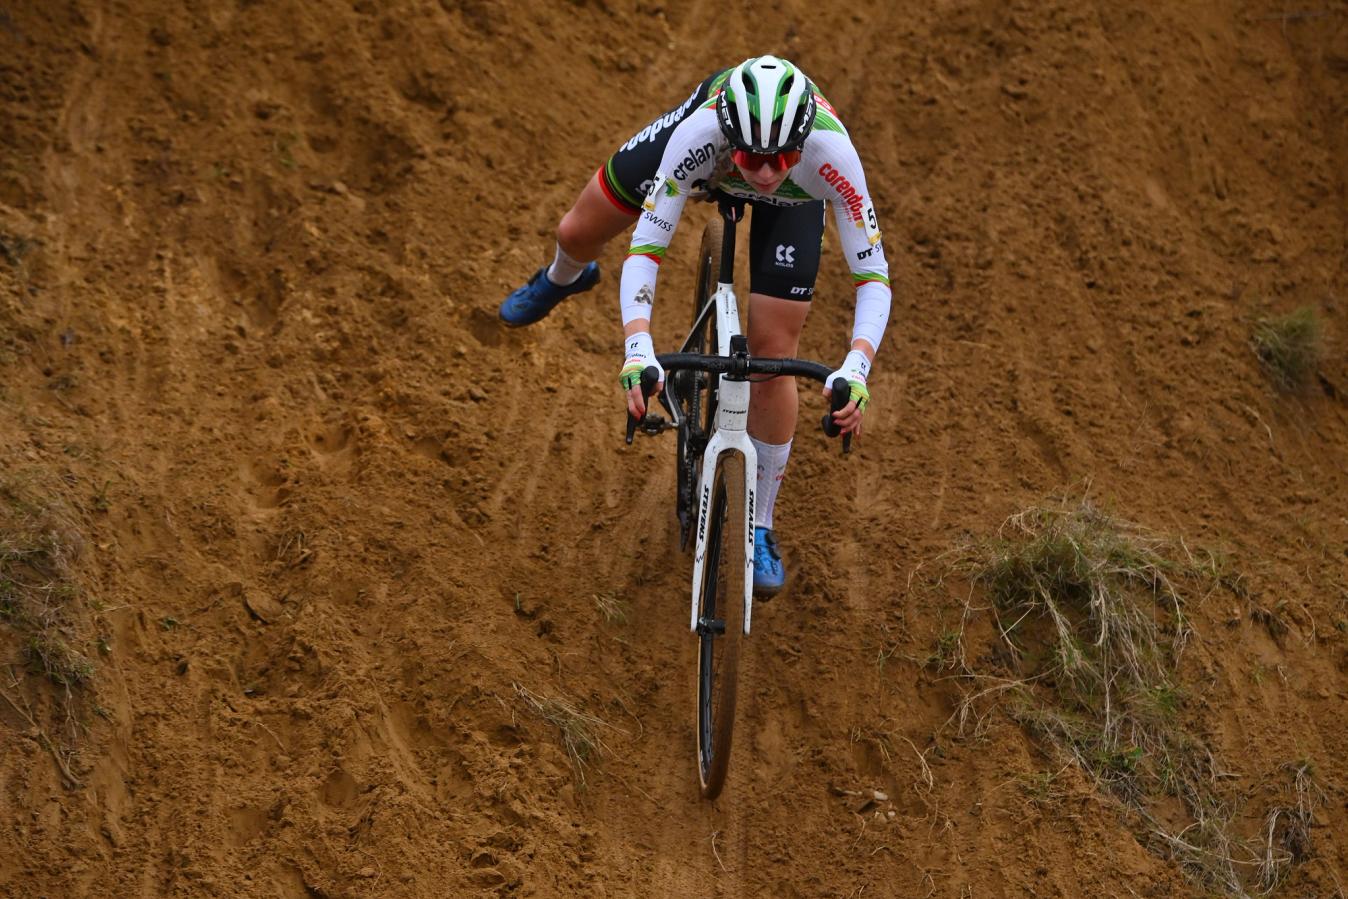 Inge van der Heijden threatened to catch the leading duo at times during the race, but eventually came home third after an impressive ride 